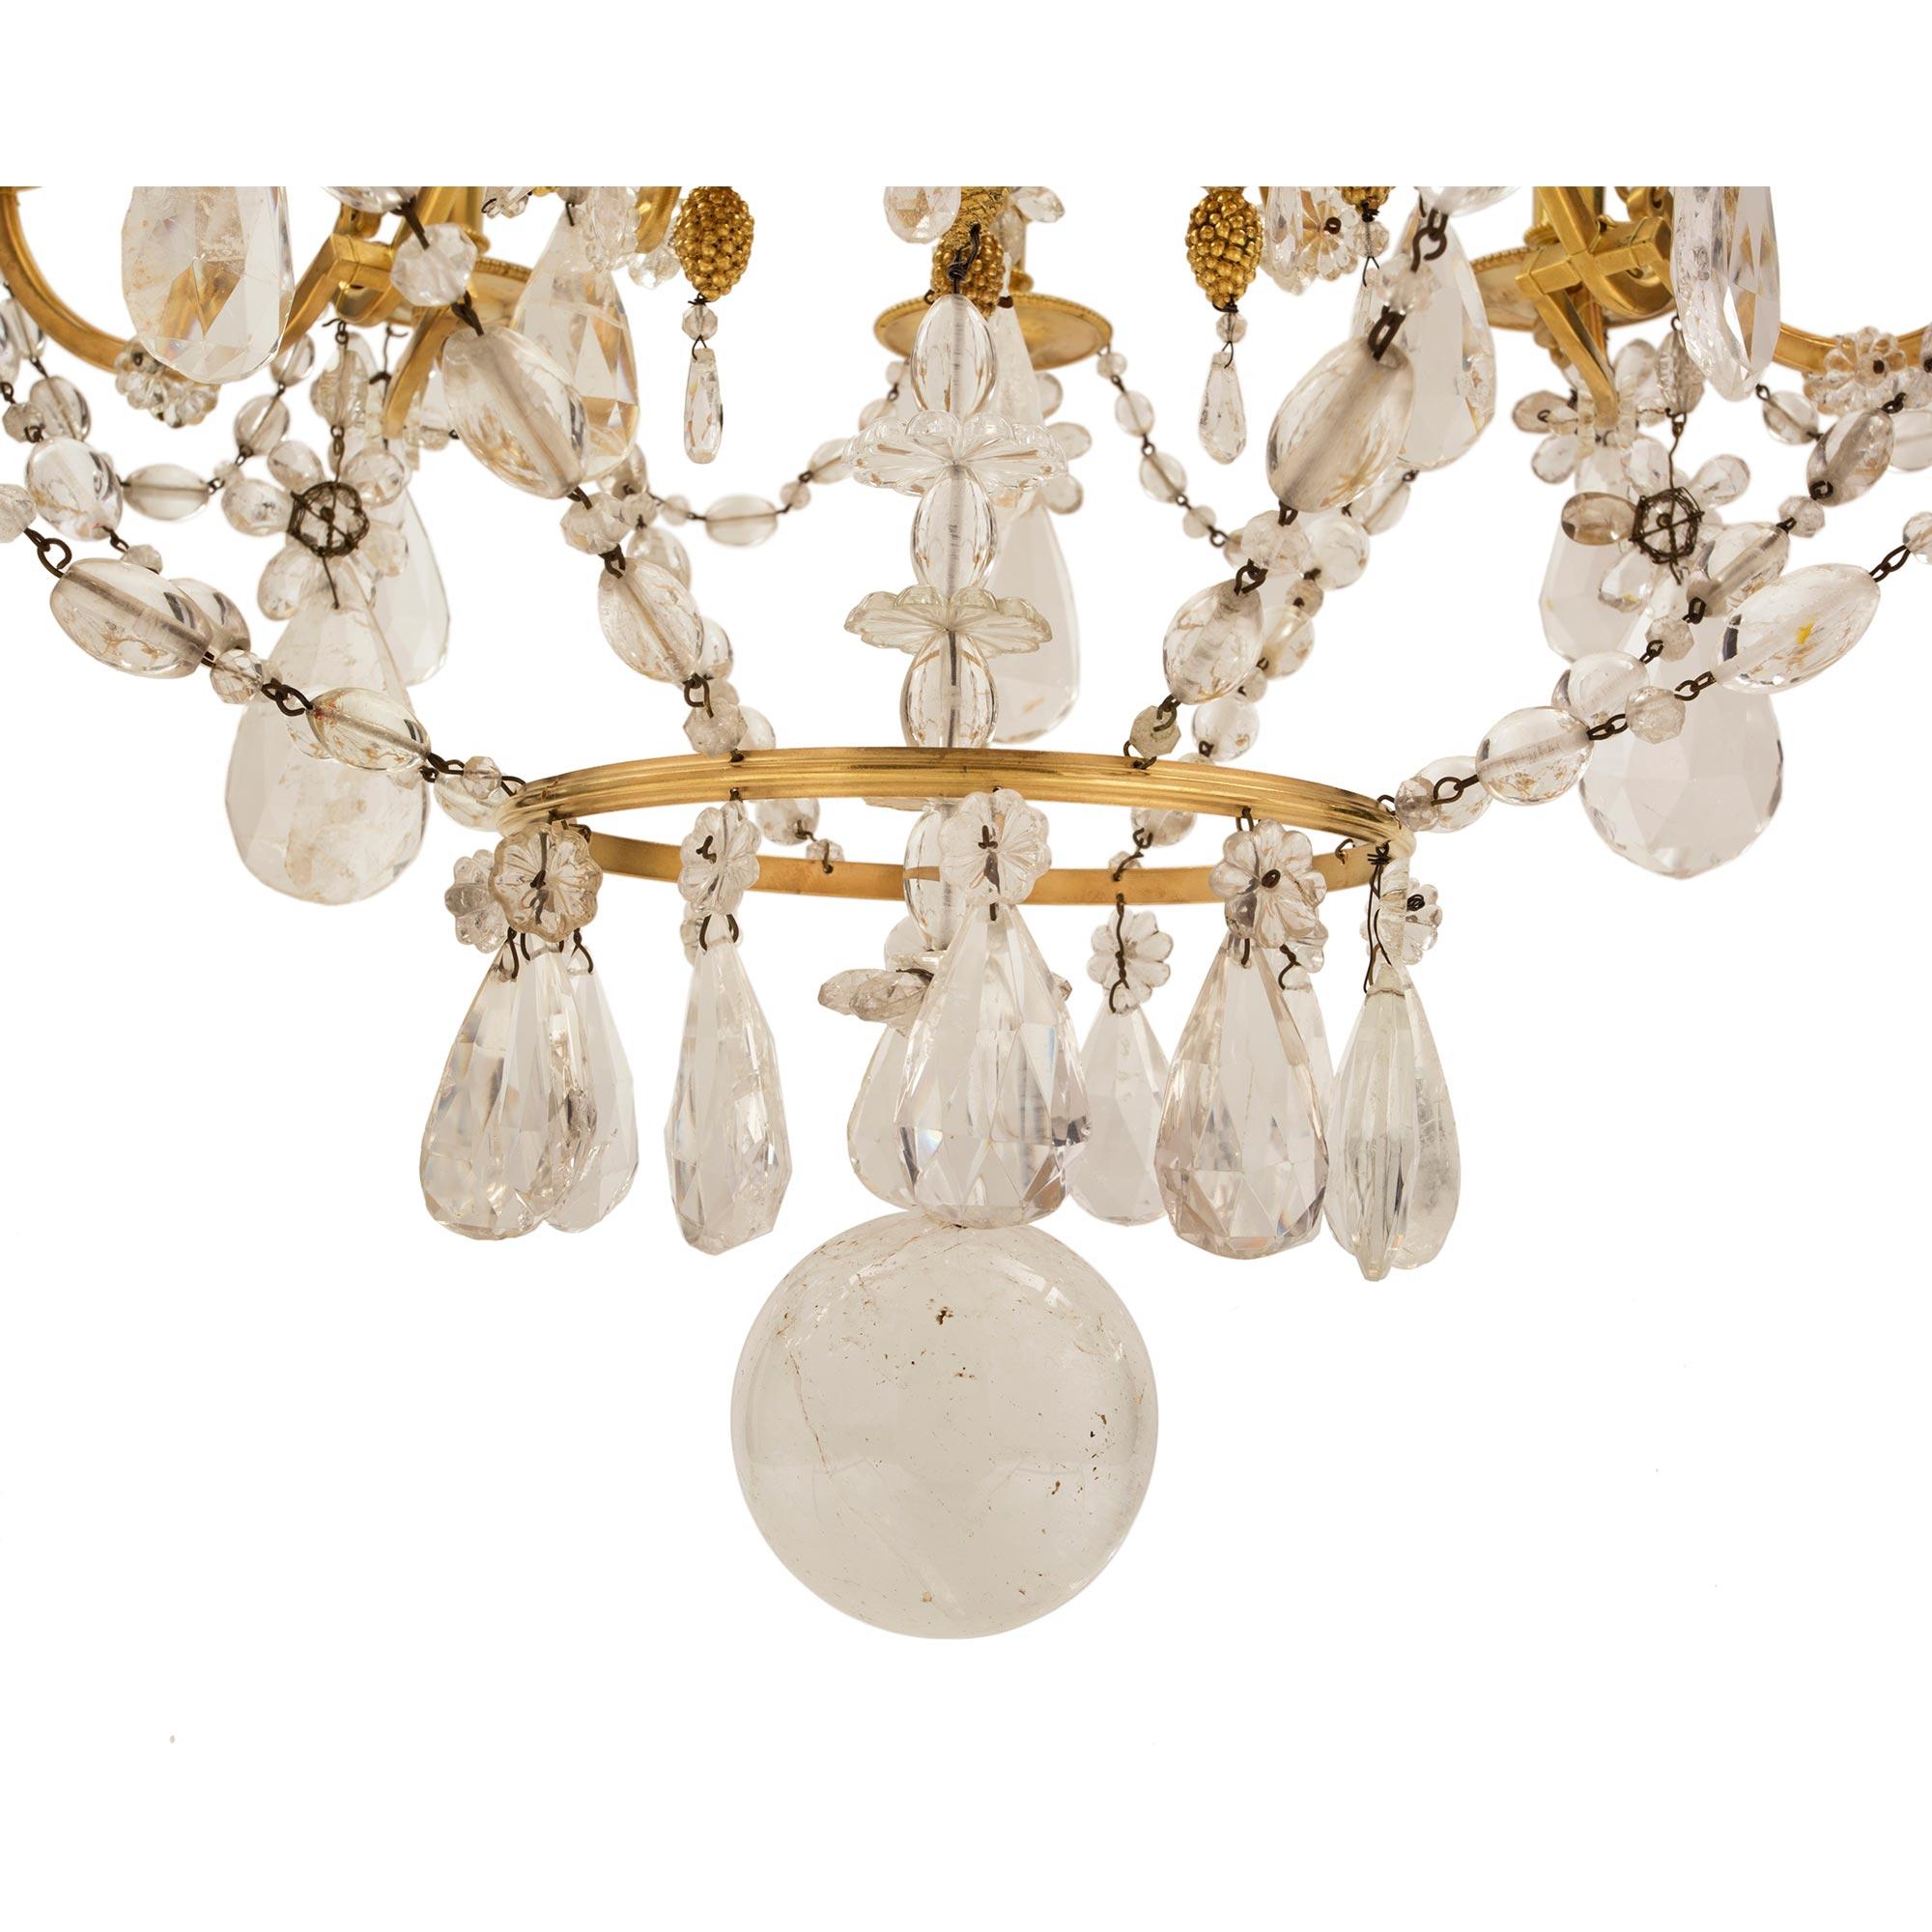 French 19th Century Louis XVI Style Ormolu, Baccarat and Rock Crystal Chandelier For Sale 4